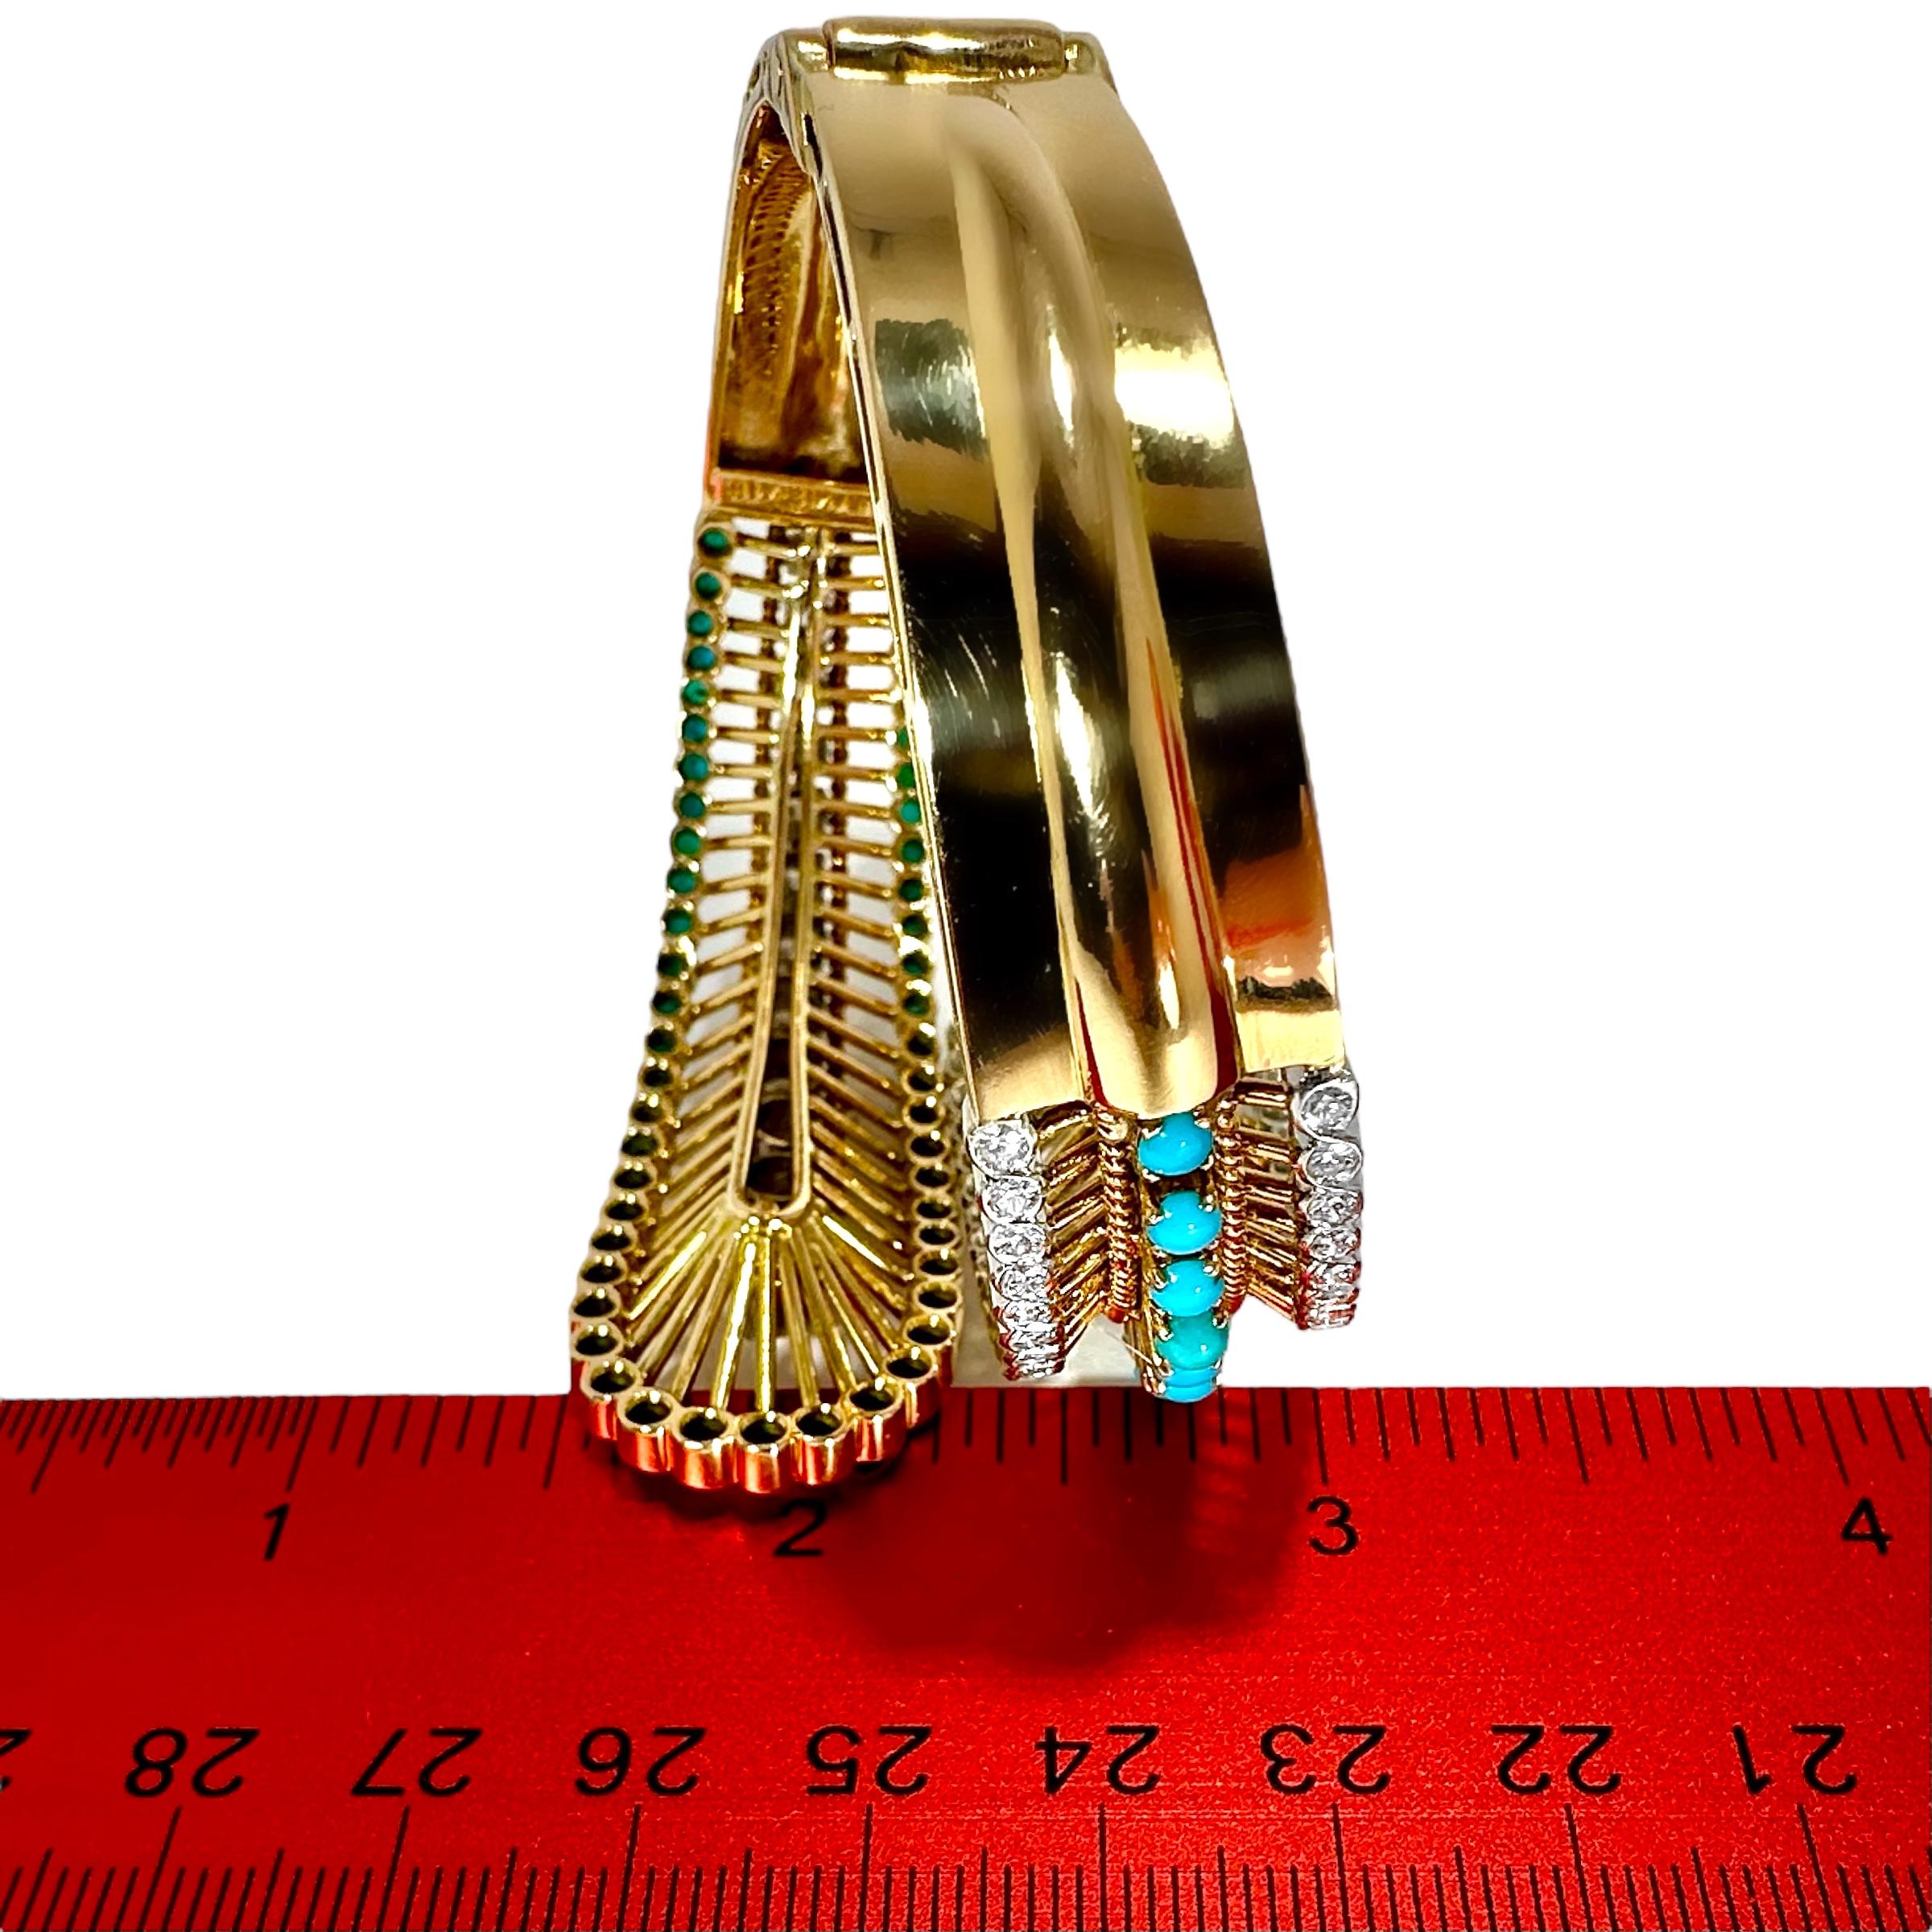 Elegant Wide Bypass Cuff in Gold, Turquoise & Diamonds by Greek Maker VOURAKIS  4